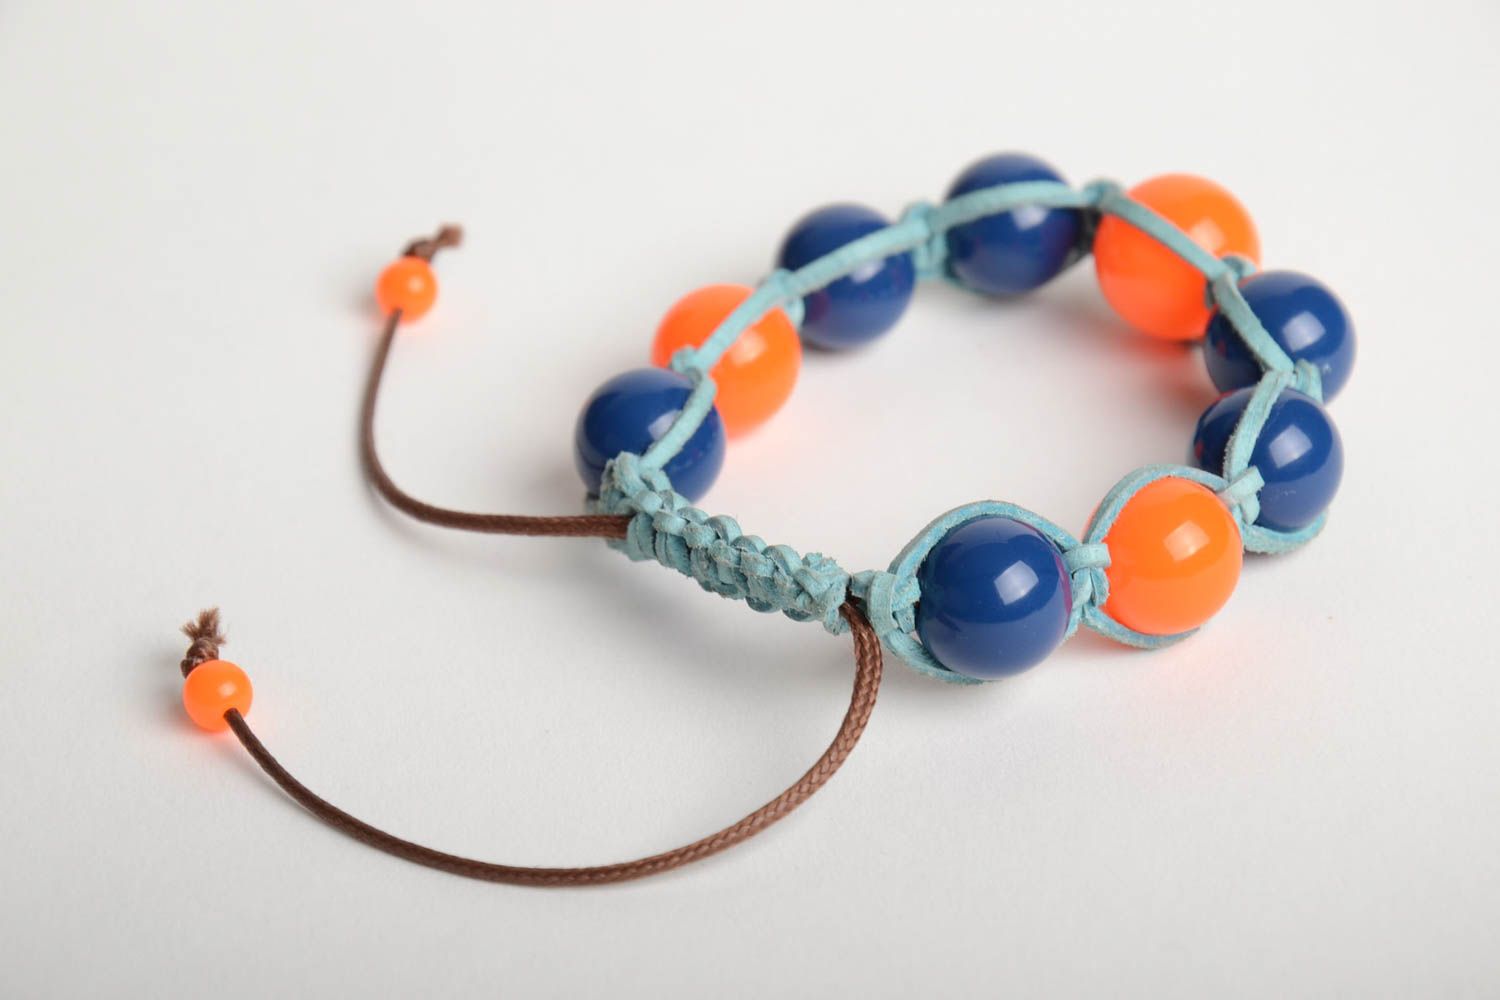 Handmade wrist bracelet woven of blue waxed cord and colorful plastic beads photo 5